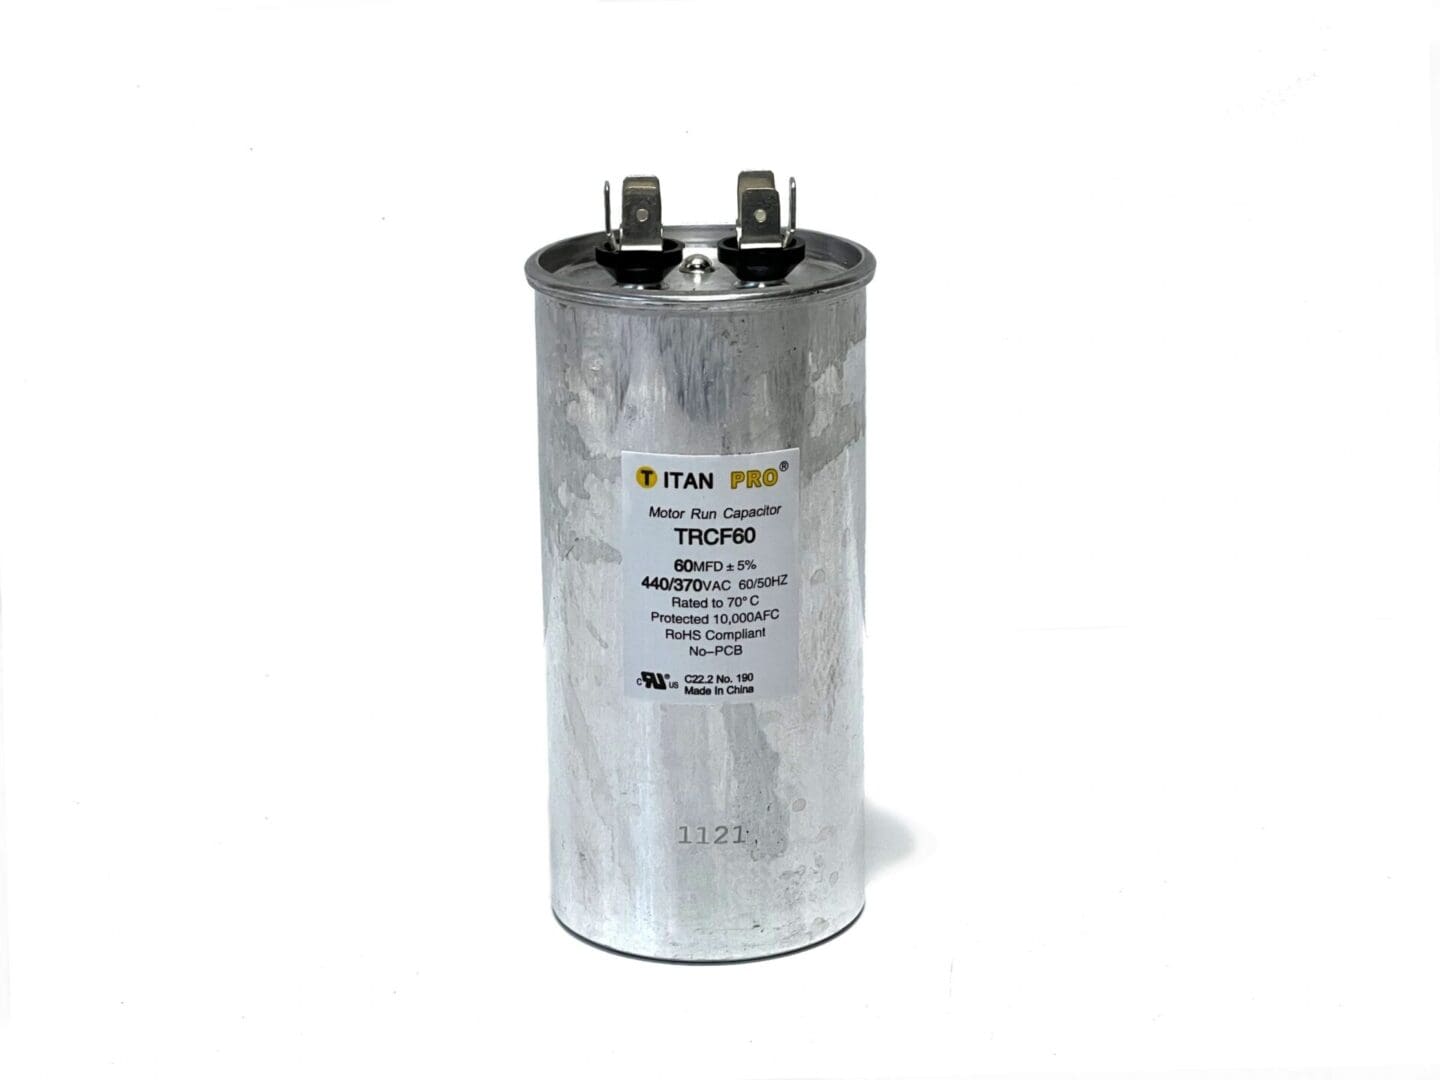 A capacitor is shown with the words " titan prep ".